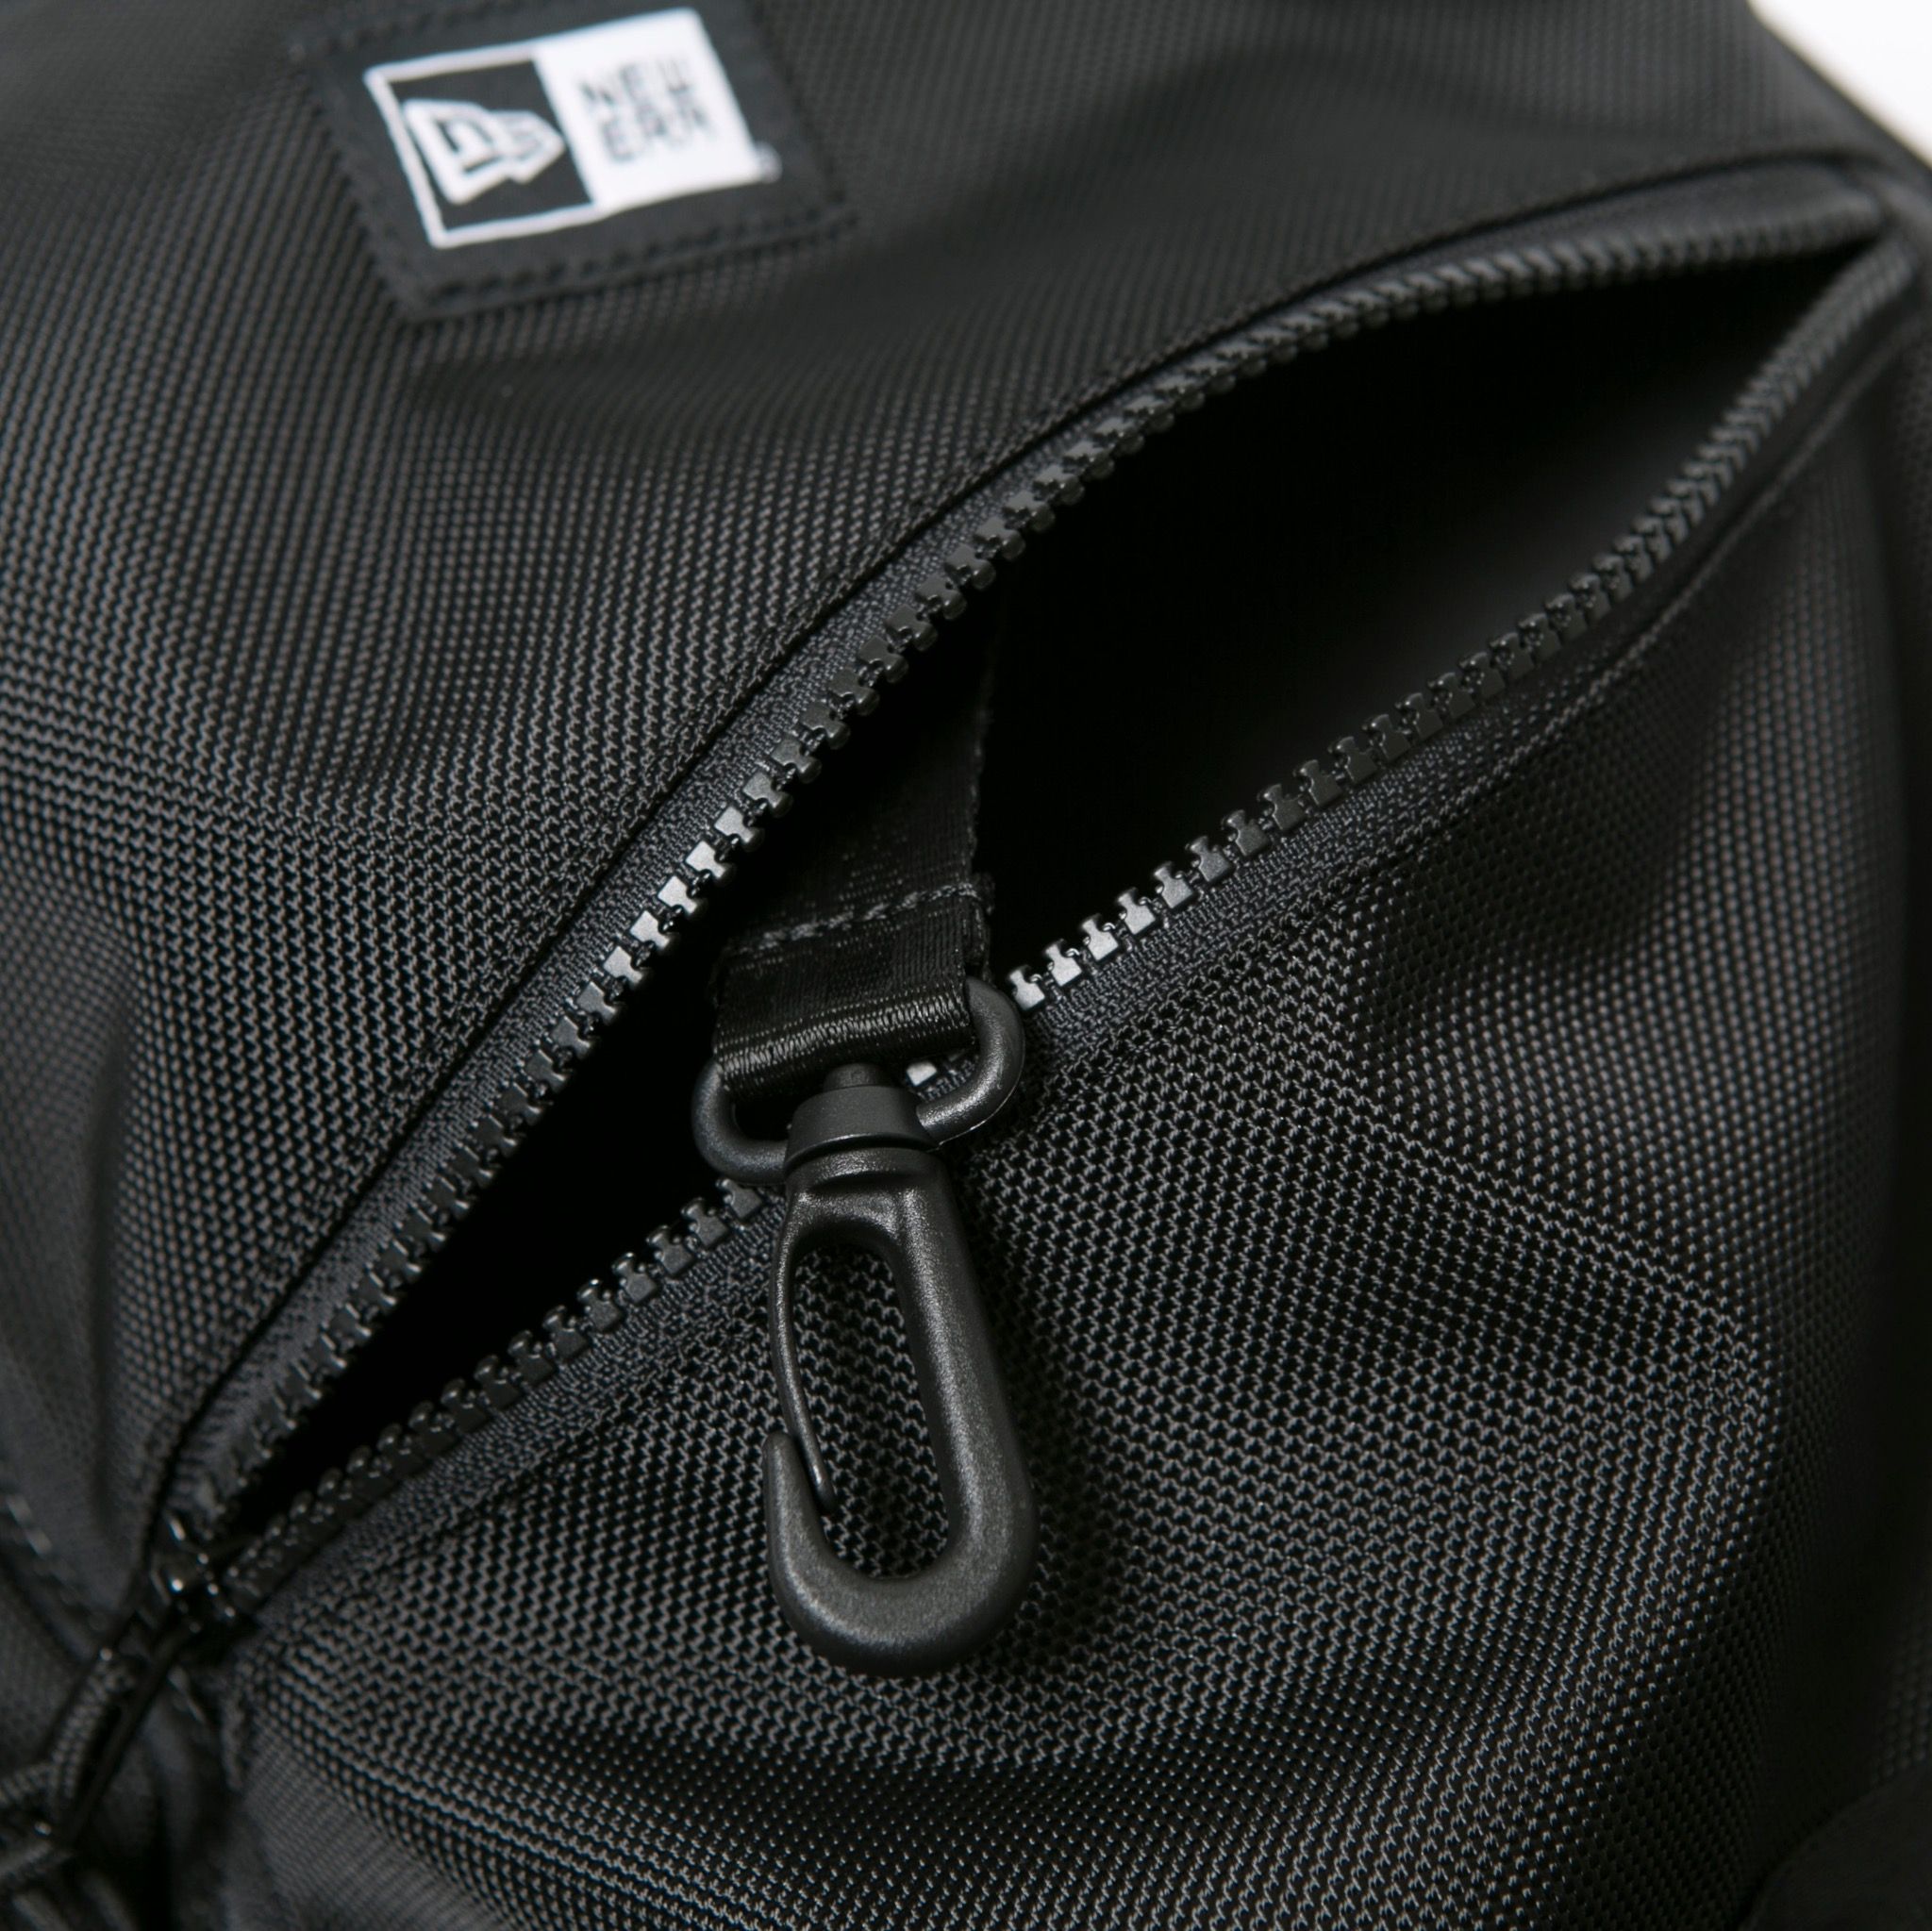  New Era Urban Utility Collection Backpack 33L - Black 